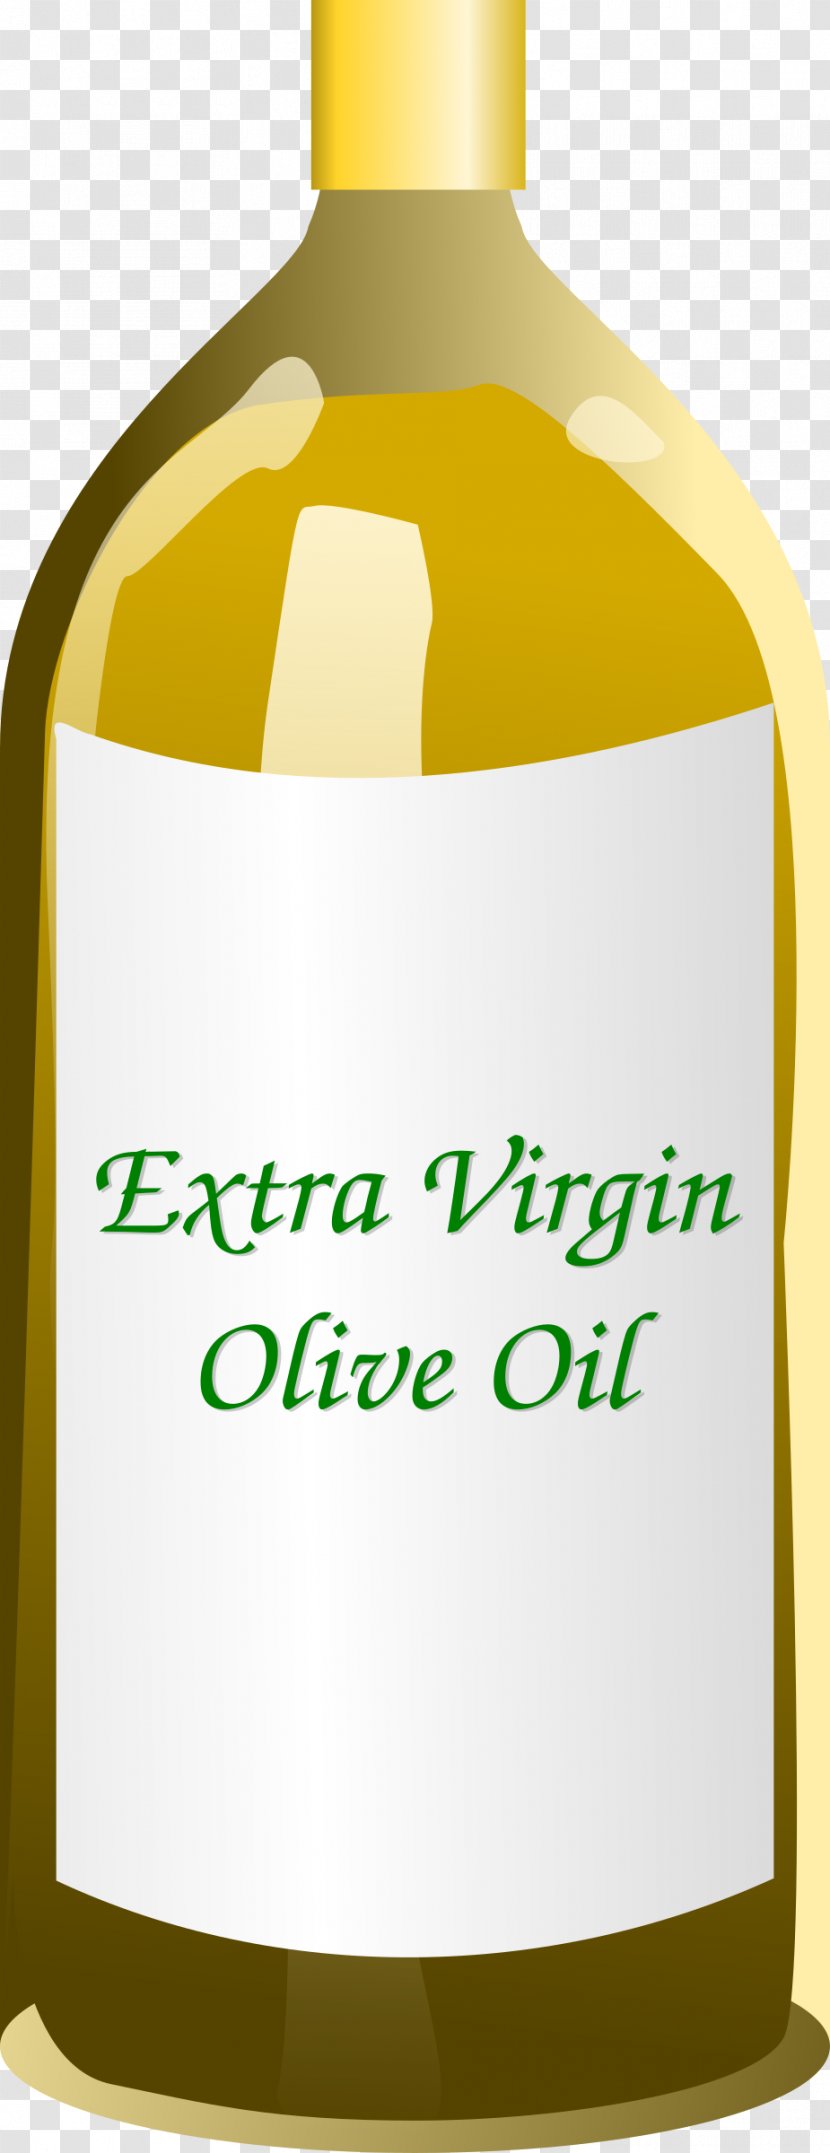 Italian Cuisine Olive Oil Clip Art - Brand - Cooking Cliparts Transparent PNG